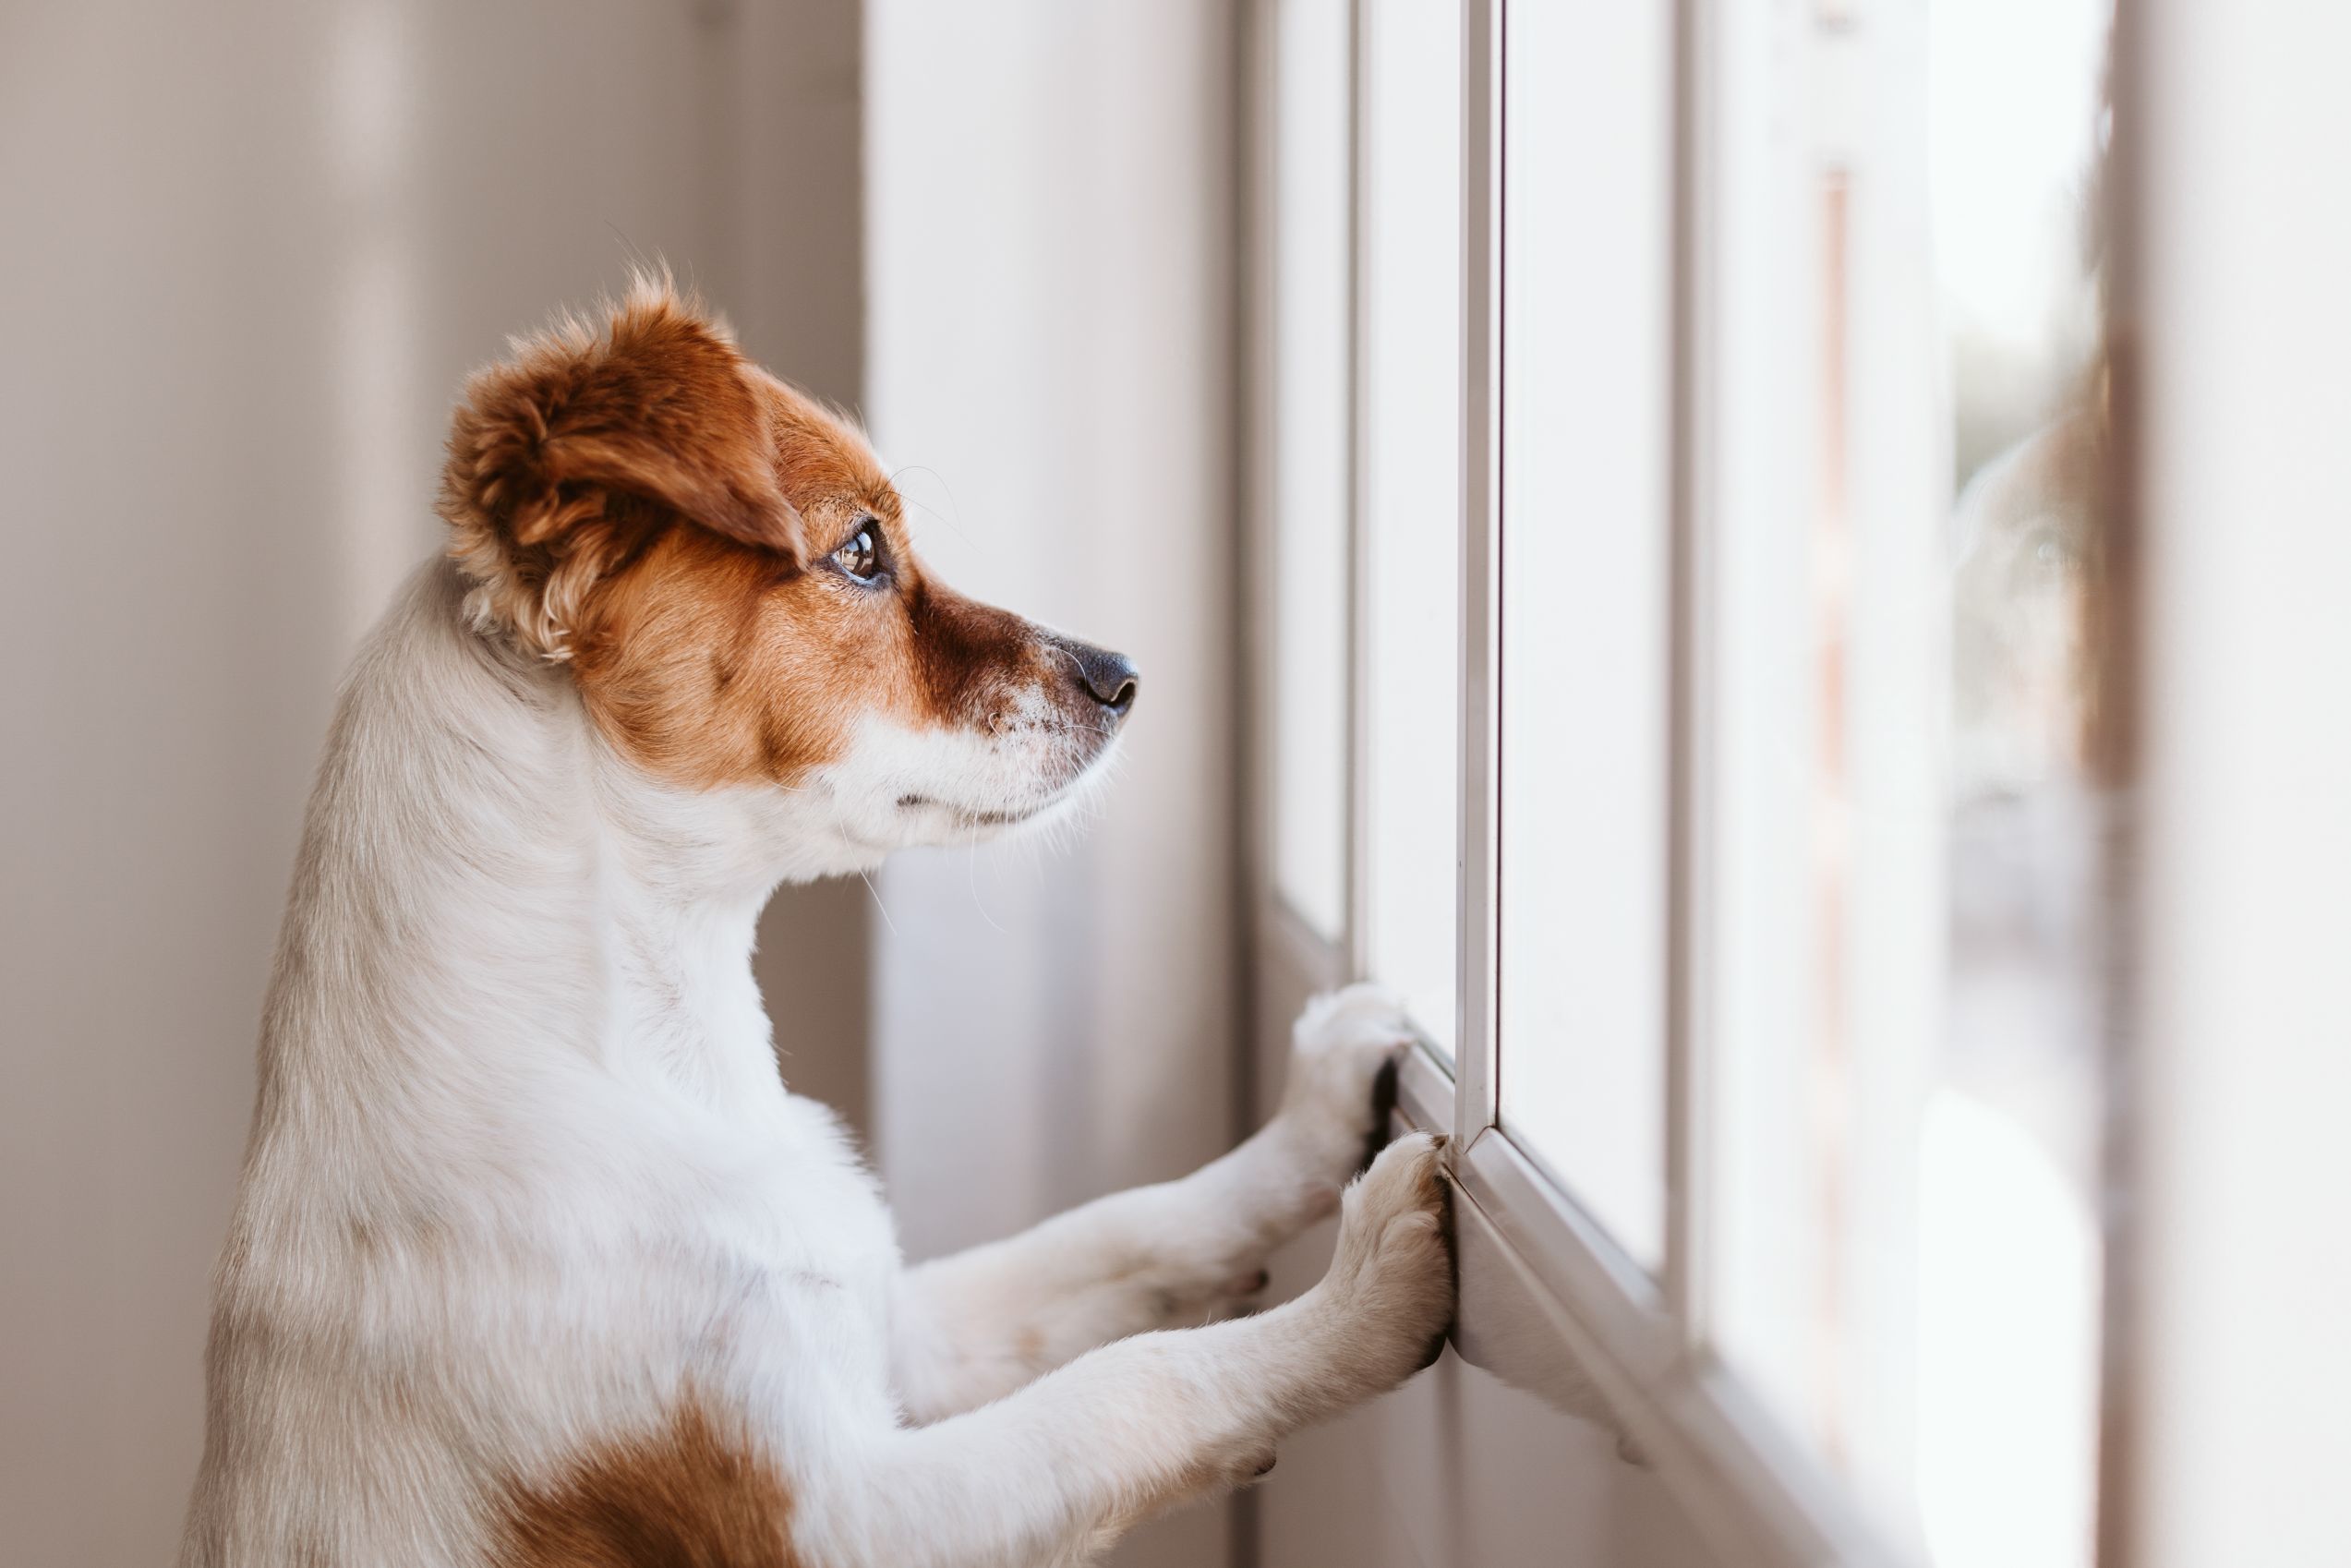 Alone Time for Dogs: How Much Is Too Much? – American Kennel Club